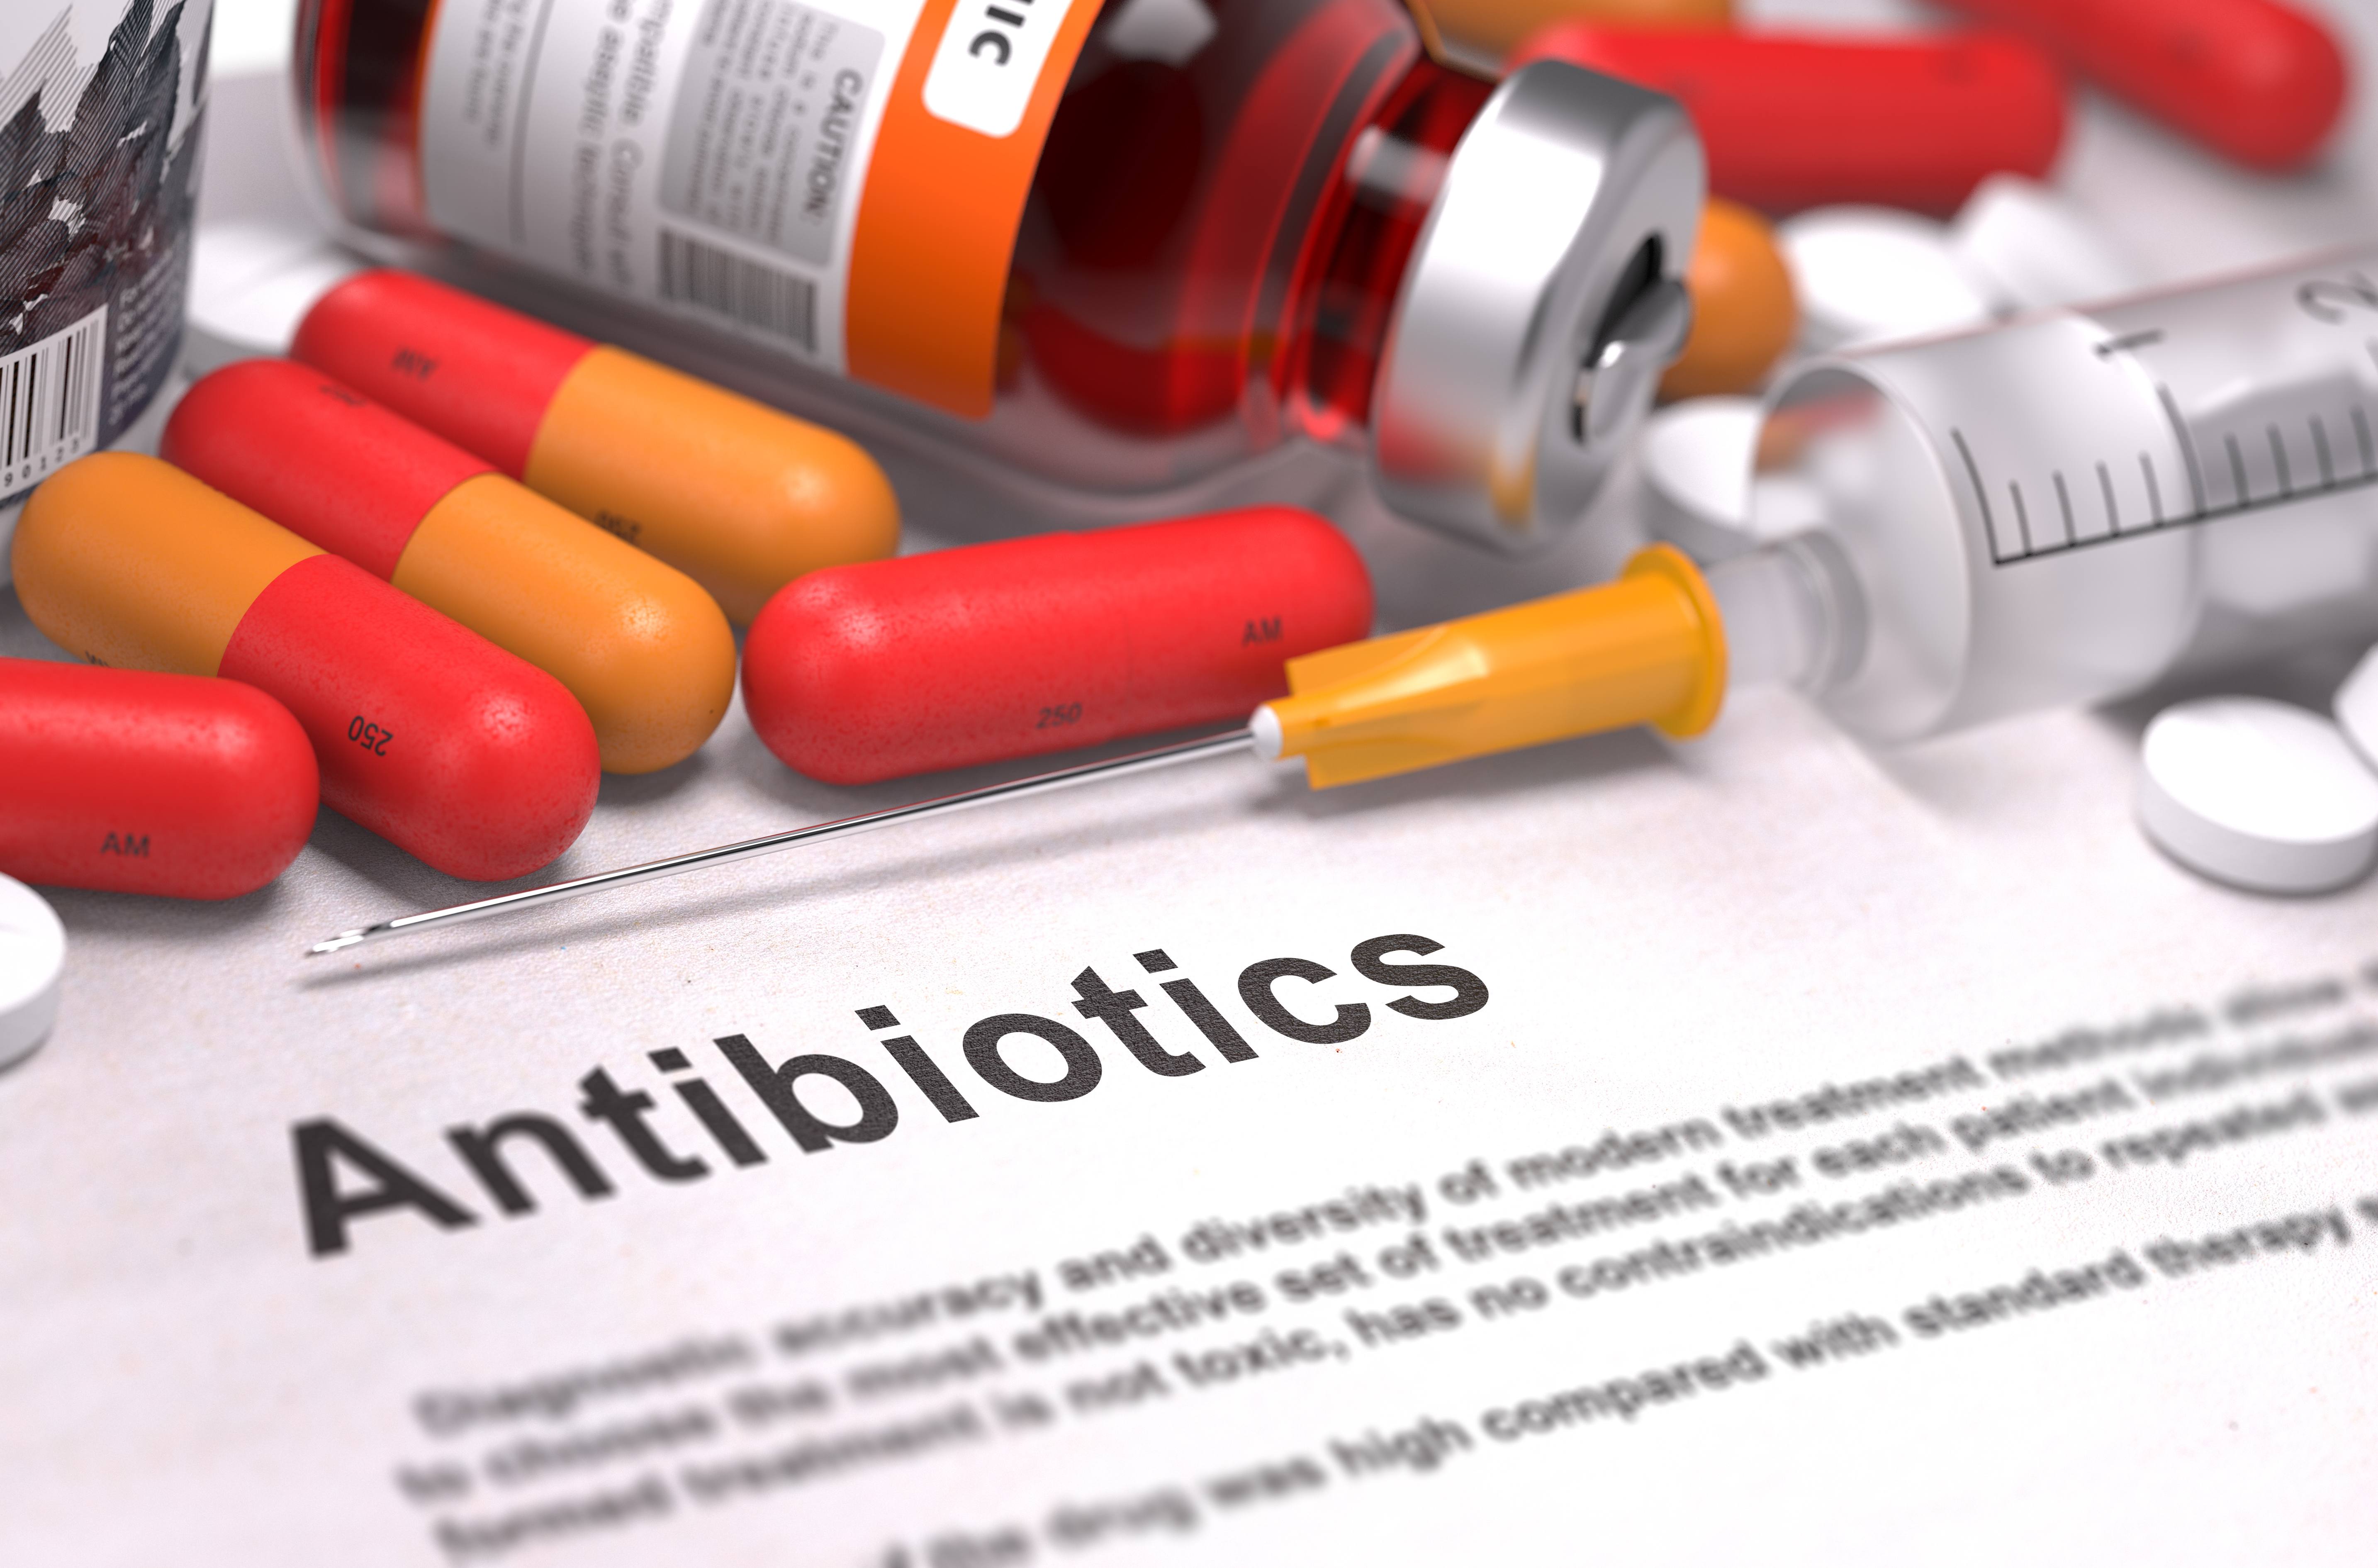 medication bottles, tablets, capules and a syringe spilled out on a piece of paper with the word Antibiotics written on it